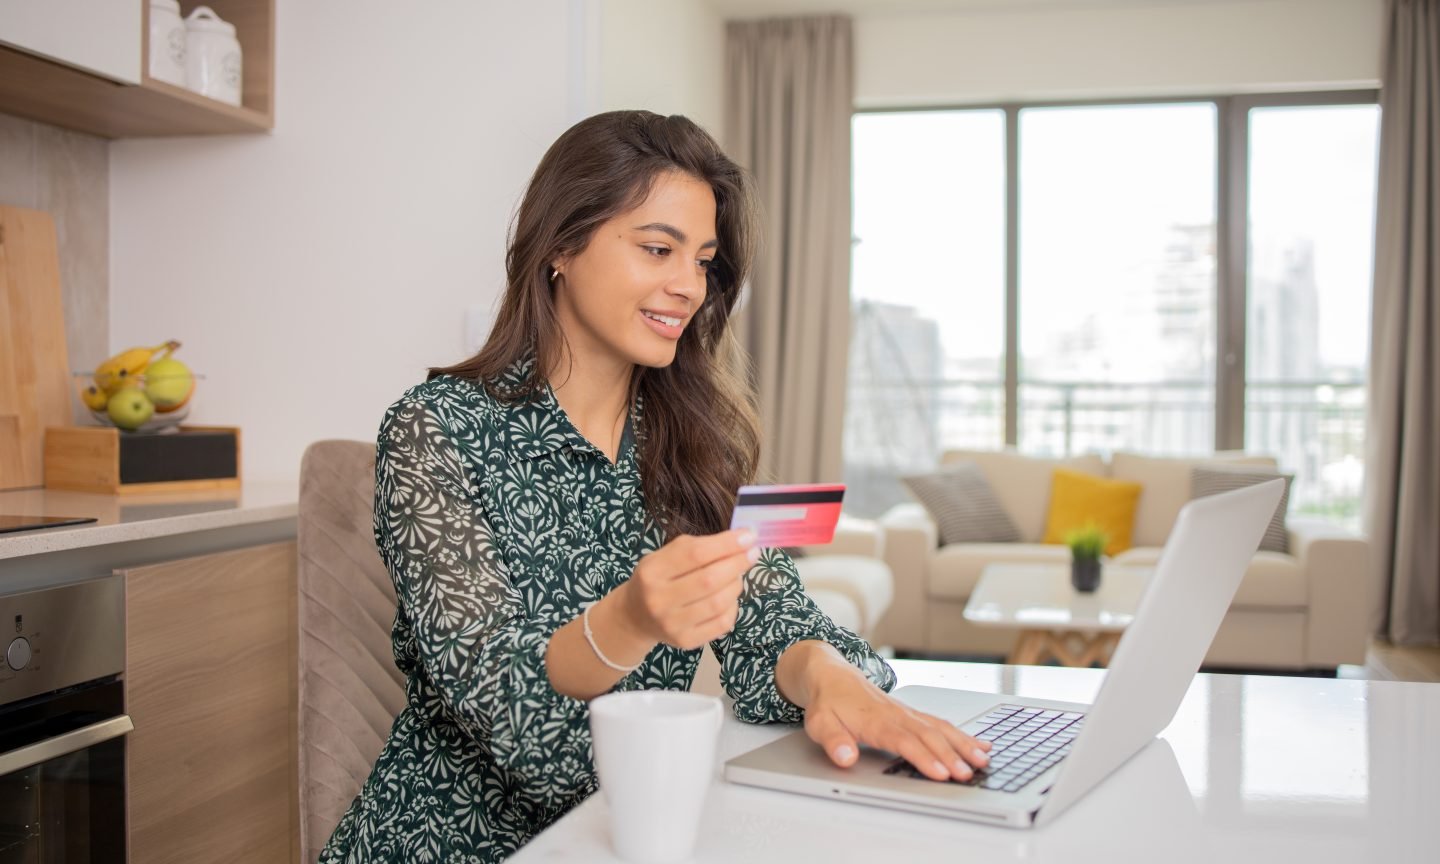 Wells Fargo Lively Money vs. Autograph: Lively Money Wins for Ease and Worth – NerdWallet